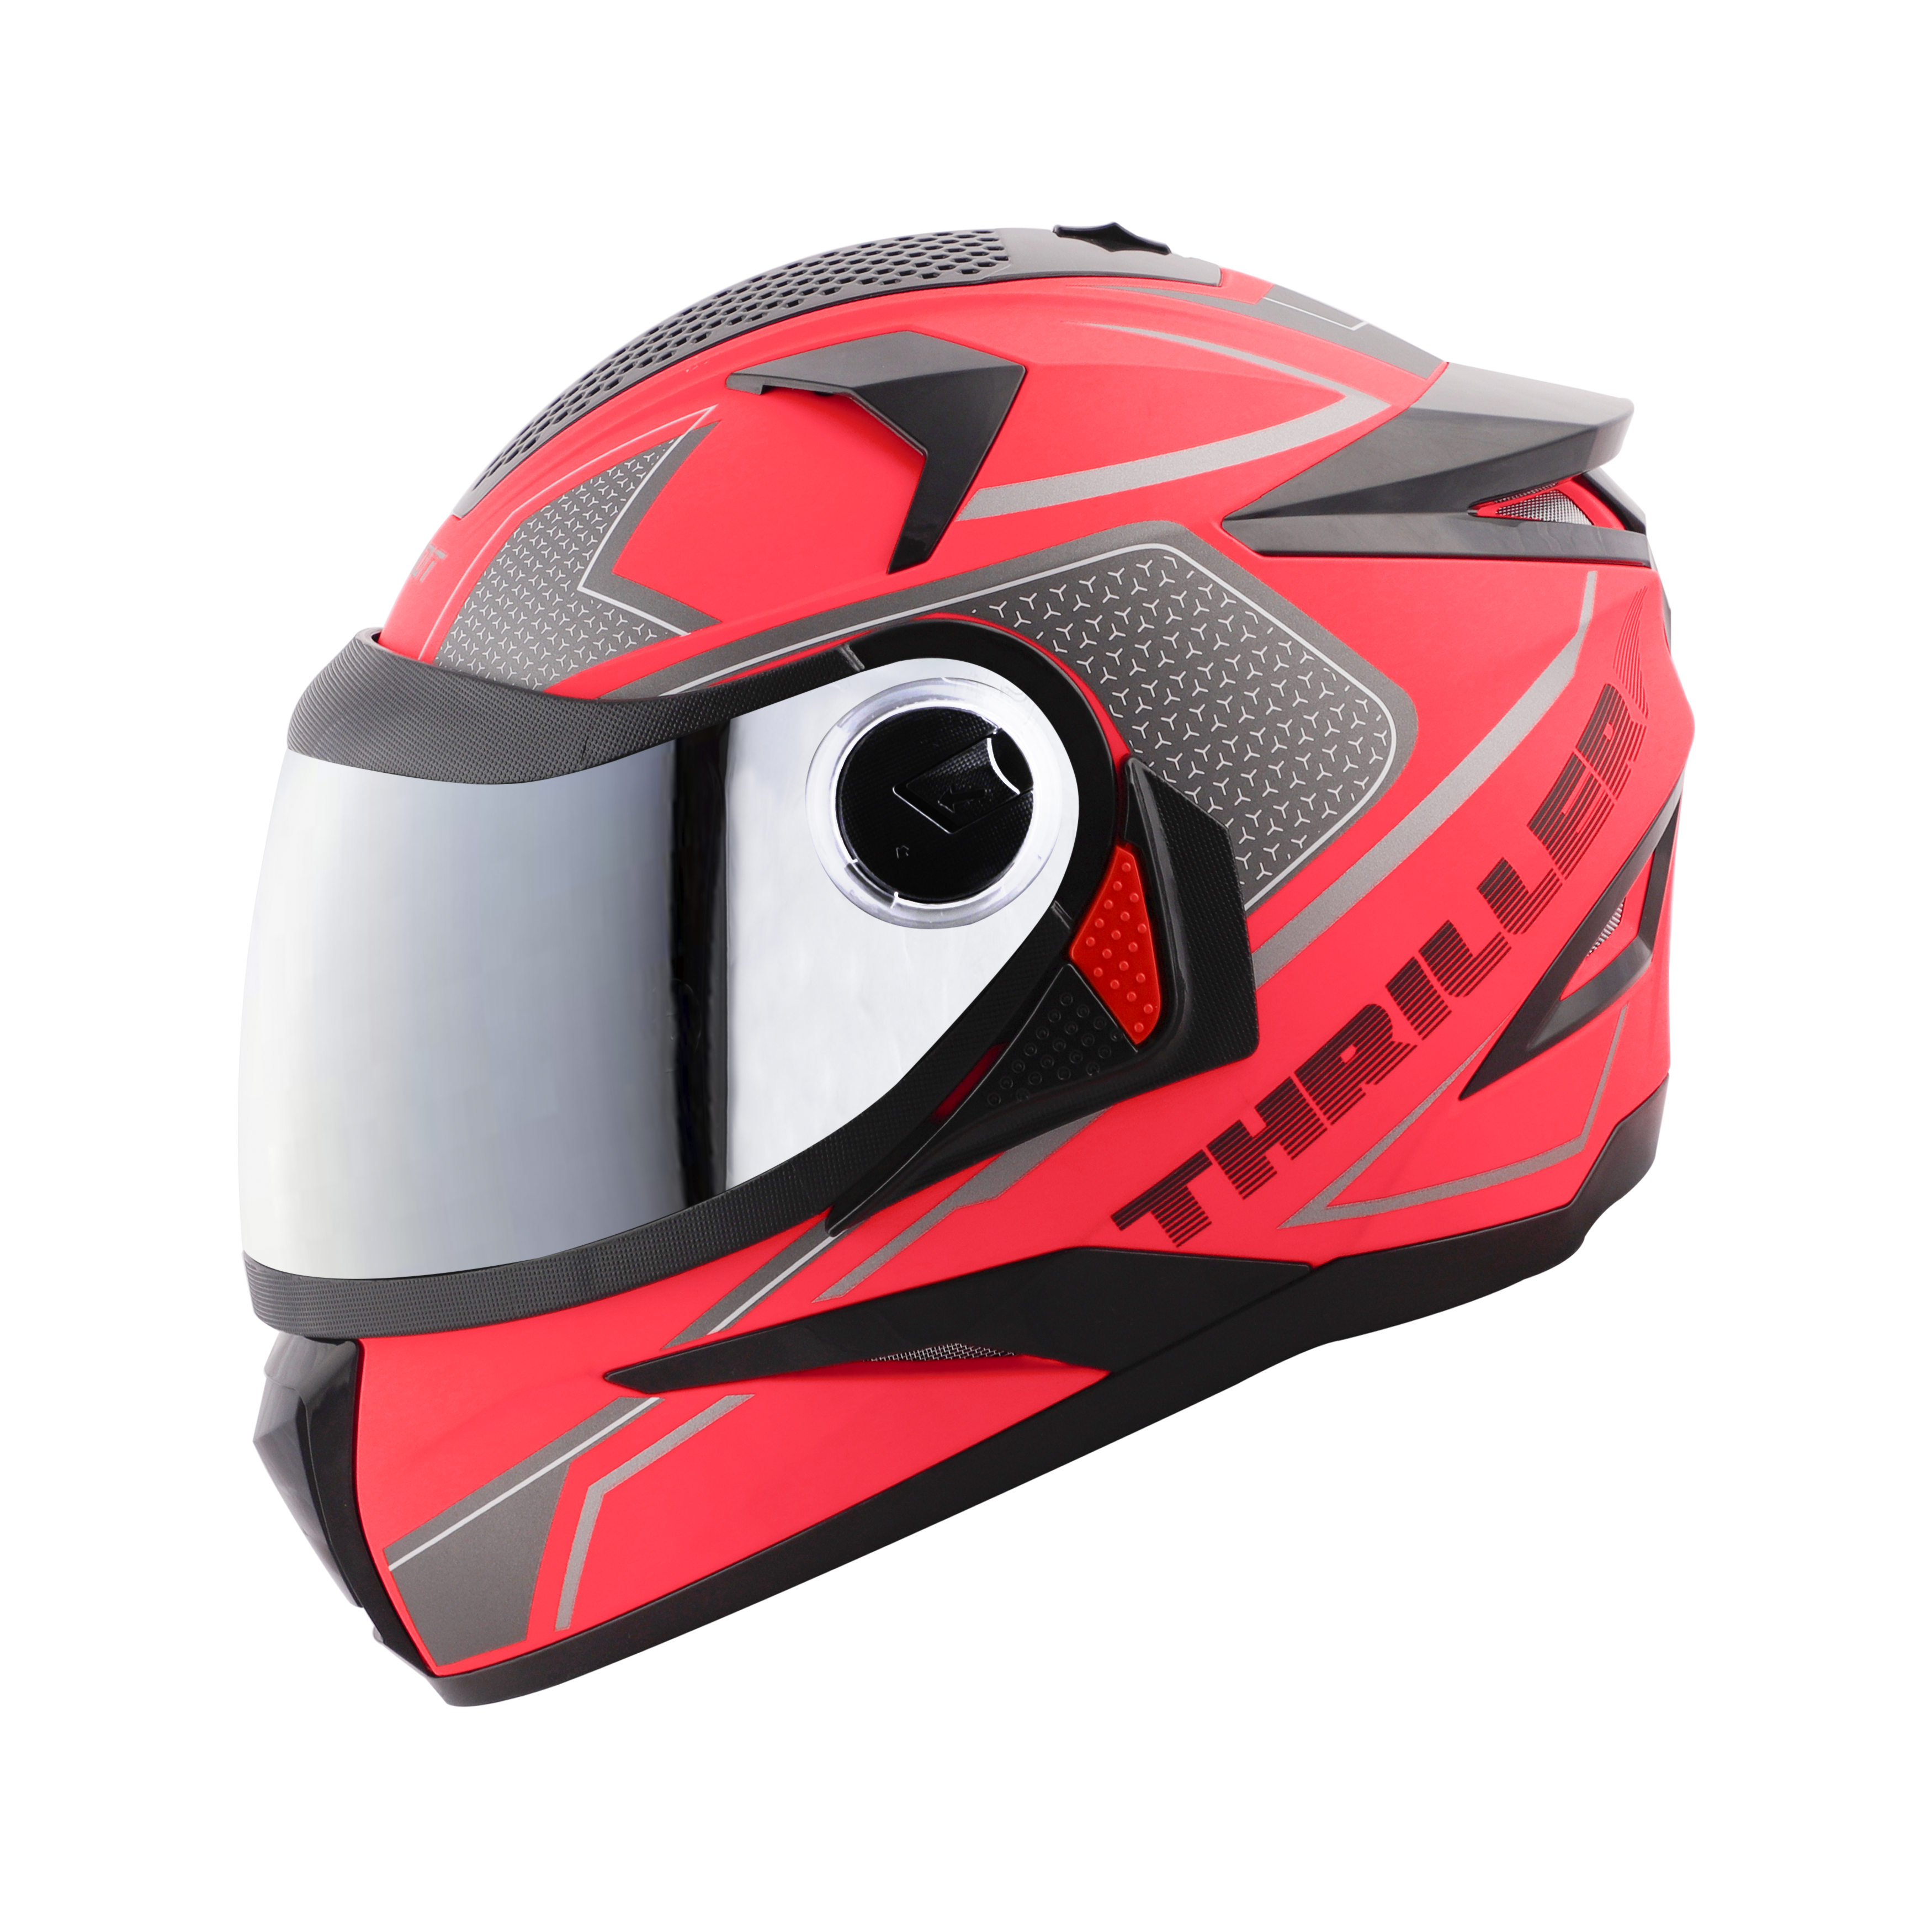 Steelbird SBH-17 Thriller ISI Certified Full Face Graphic Helmet (Glossy Fluo Watermelon Grey With Chrome Silver Visor)